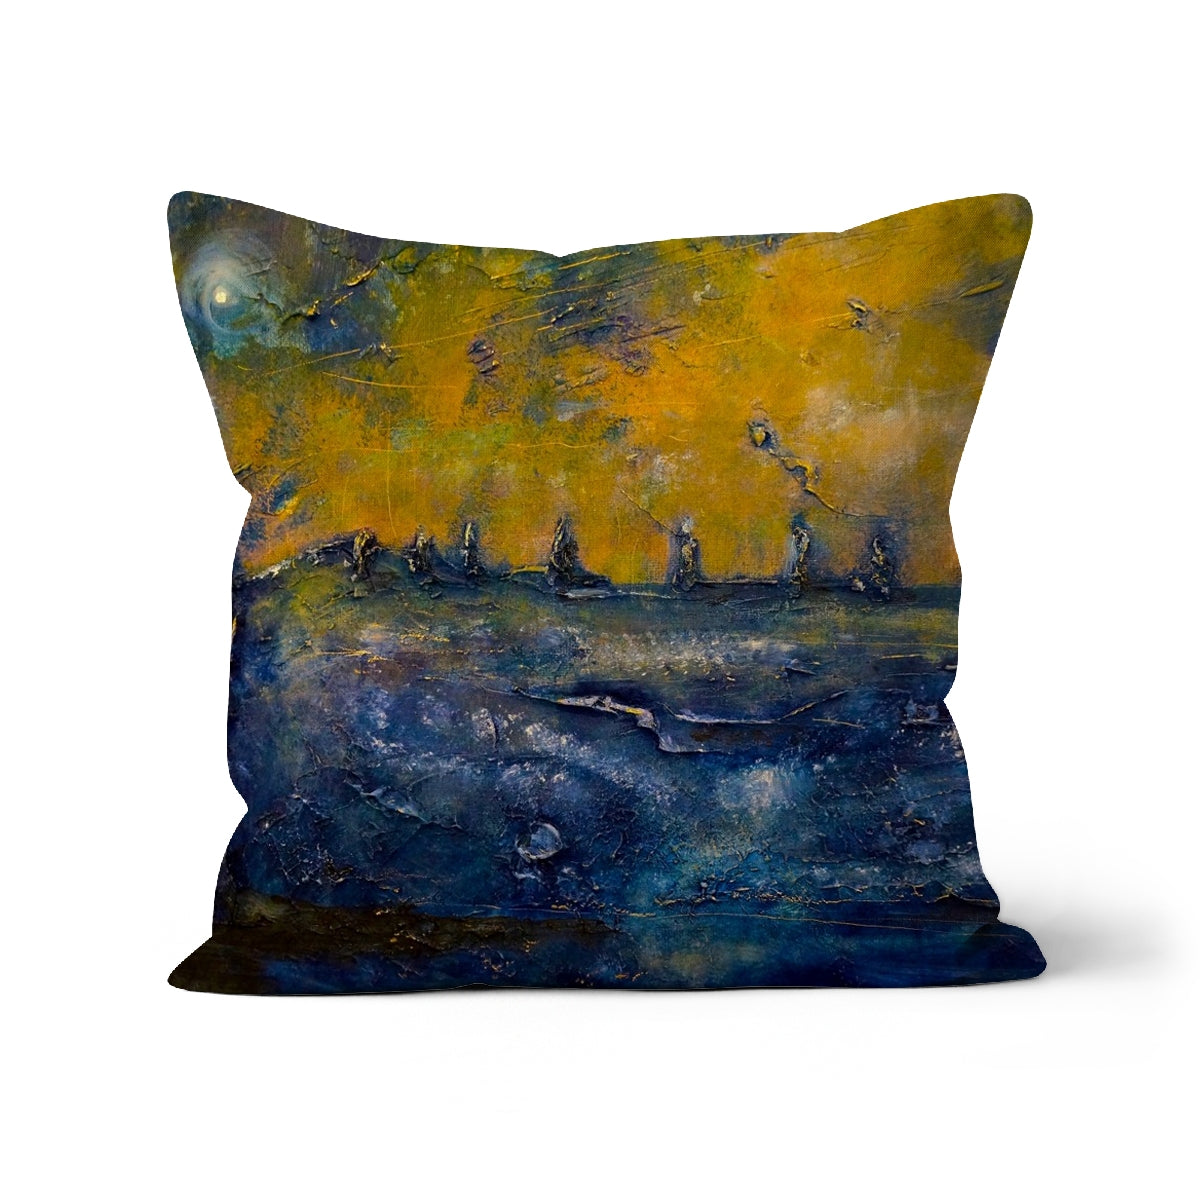 Brodgar Moonlight Orkney Art Gifts Cushion-Cushions-Orkney Art Gallery-Canvas-12"x12"-Paintings, Prints, Homeware, Art Gifts From Scotland By Scottish Artist Kevin Hunter